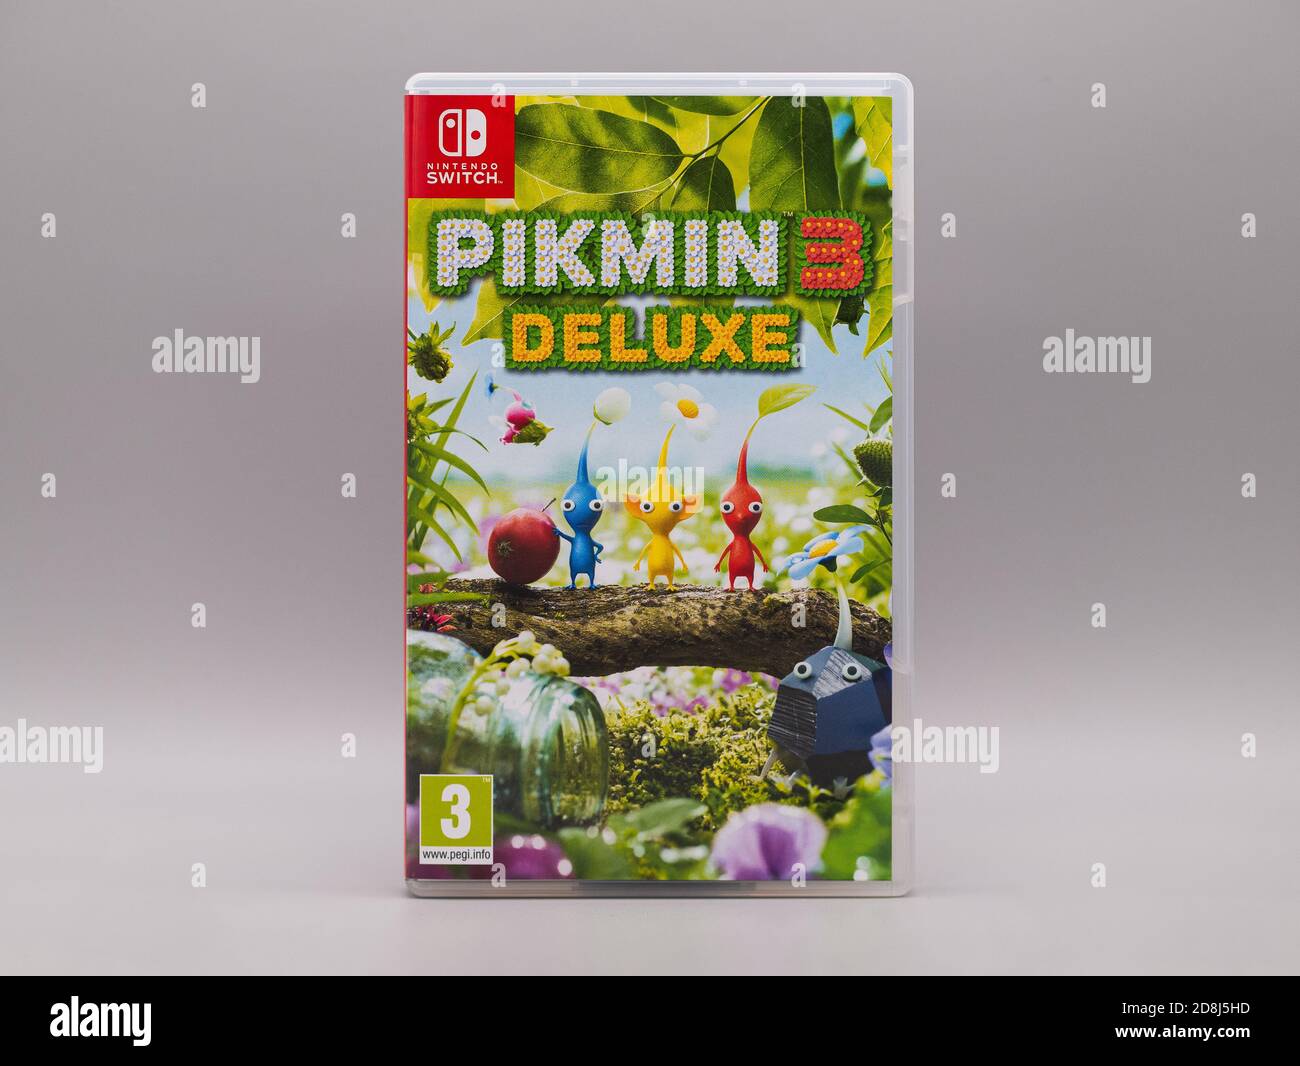 Oct 30th 2020, - - 3 Pikmin Stock Photo Alamy Deluxe Switch re-release UK game Nintendo